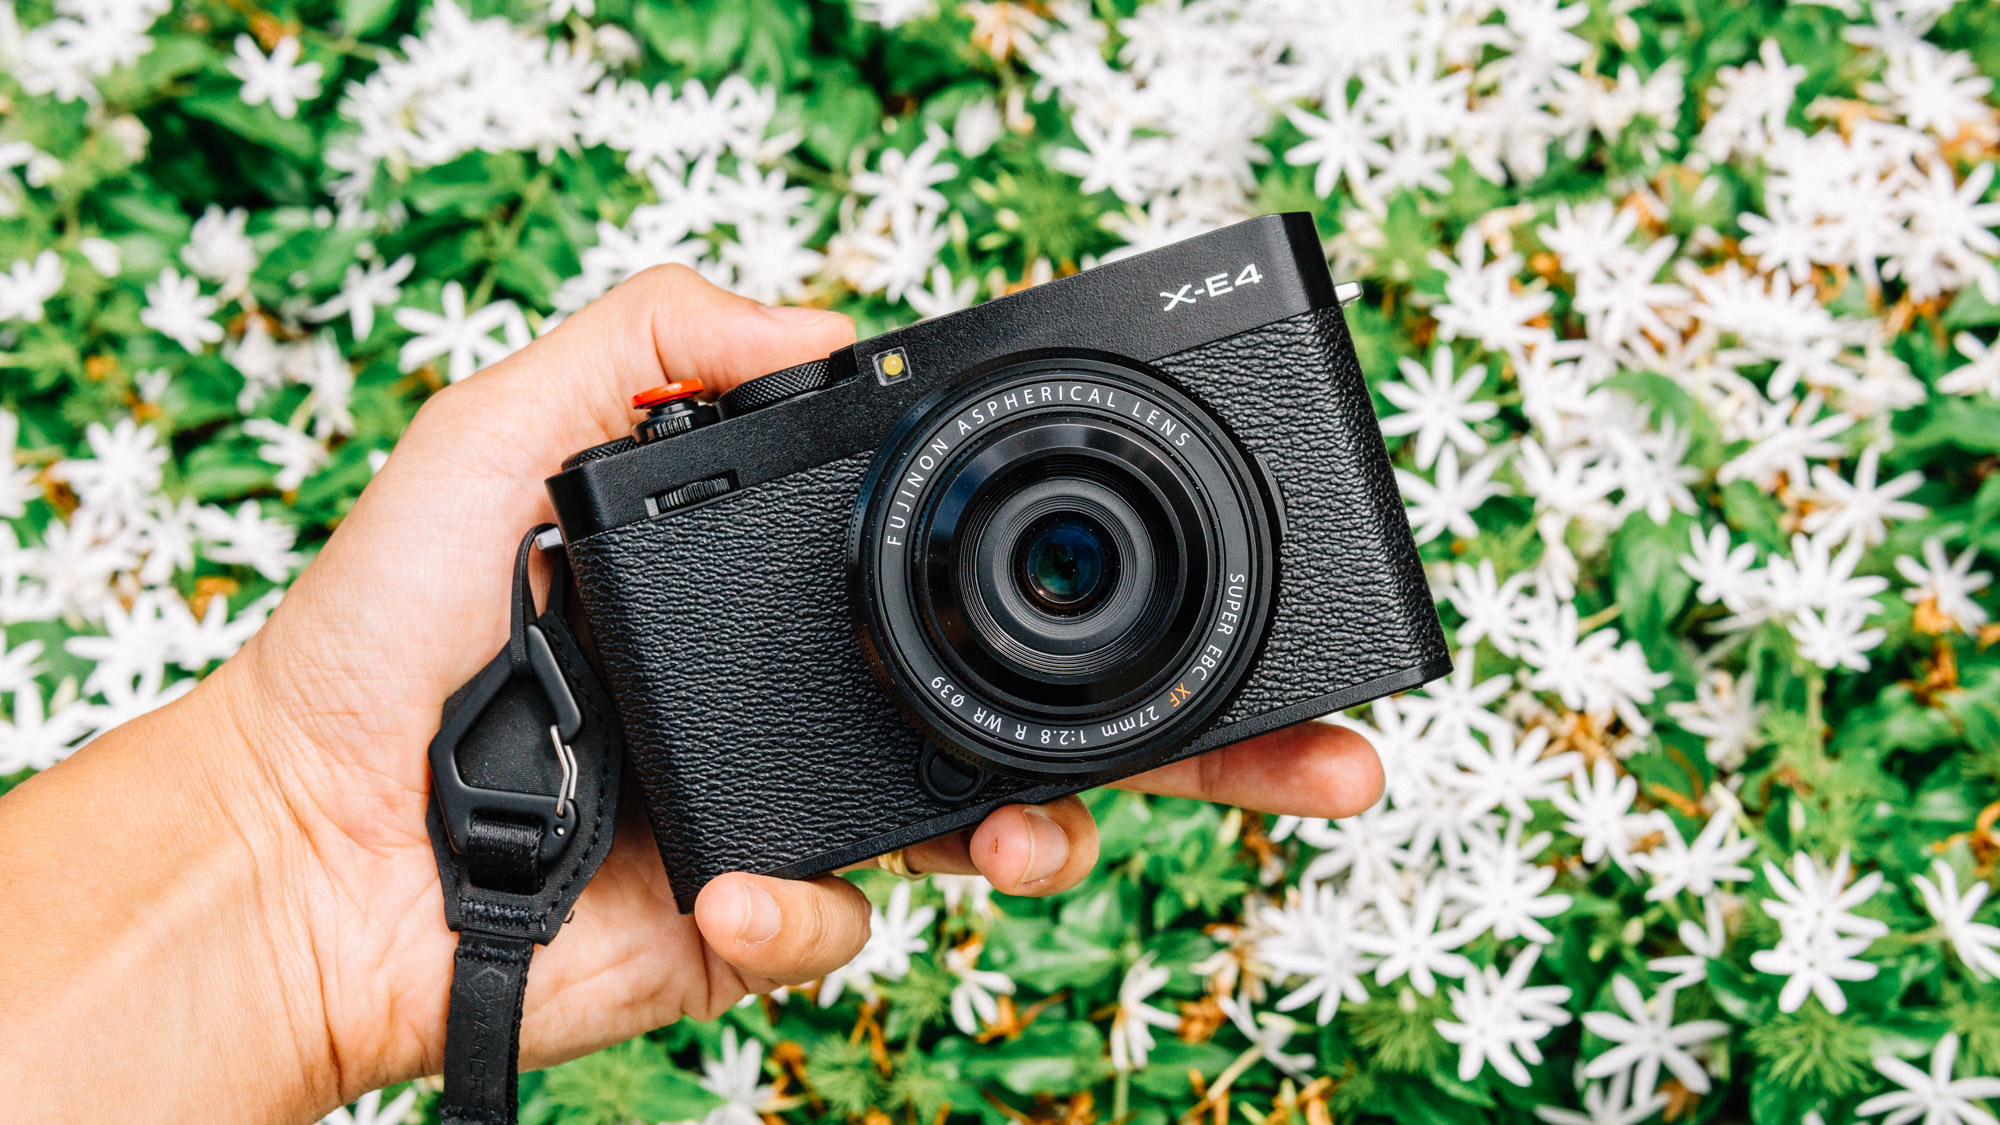 Premisse Gestaag Jurassic Park Fujifilm X-E4 Review - Rekindling my Relationship with Digital Photography